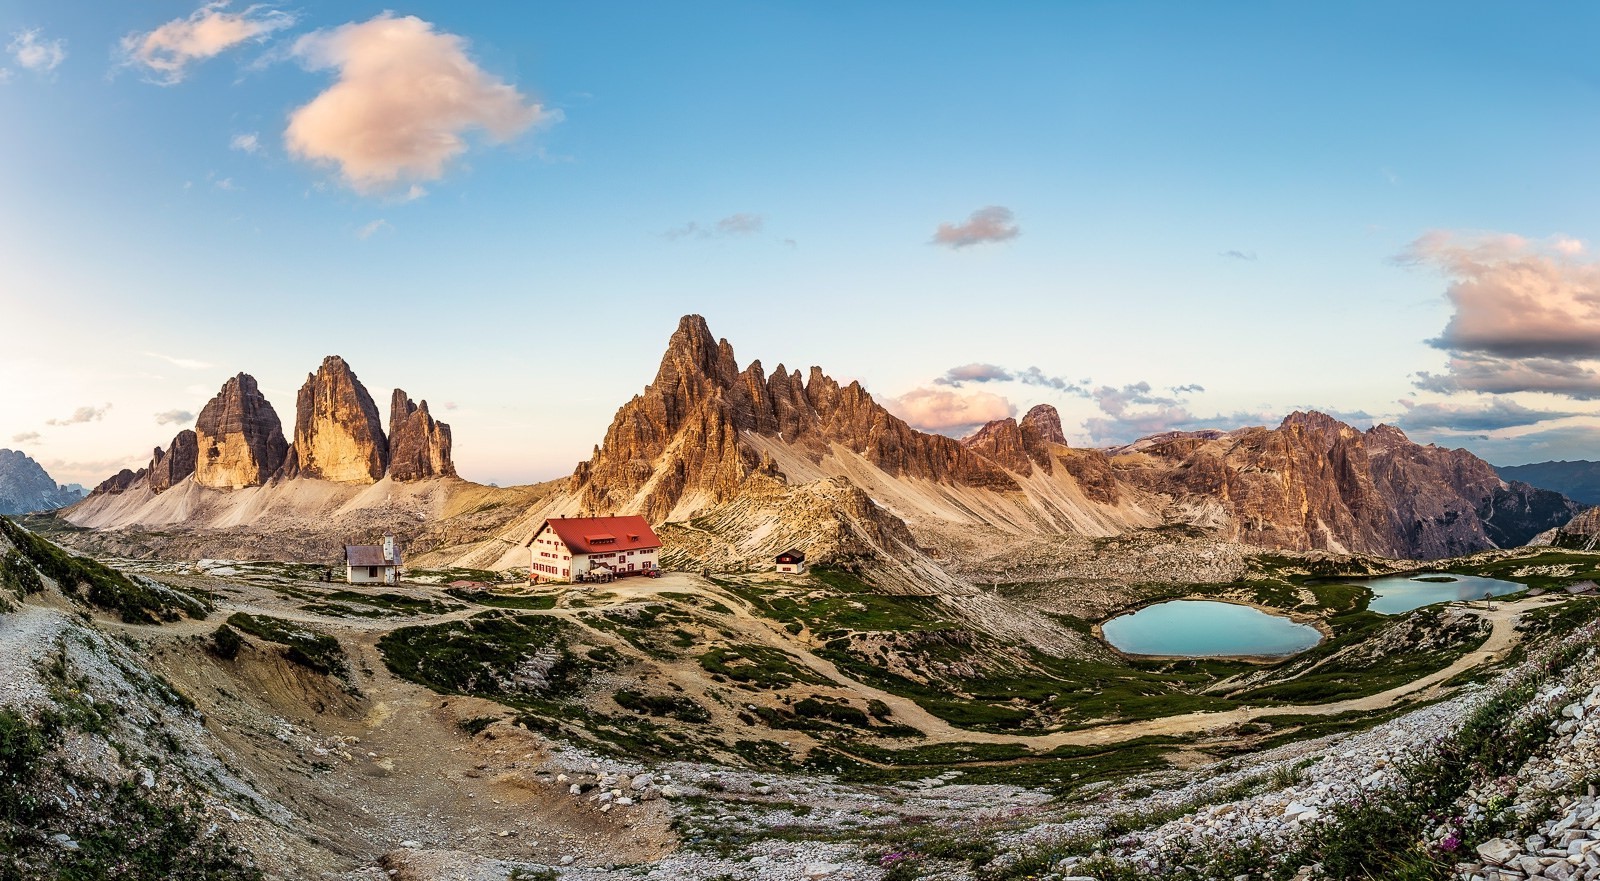 photography, Landscape, Nature, Mountains, Lake, Summer, Sunset, Cabin, Dolomites (mountains), Italy Wallpaper